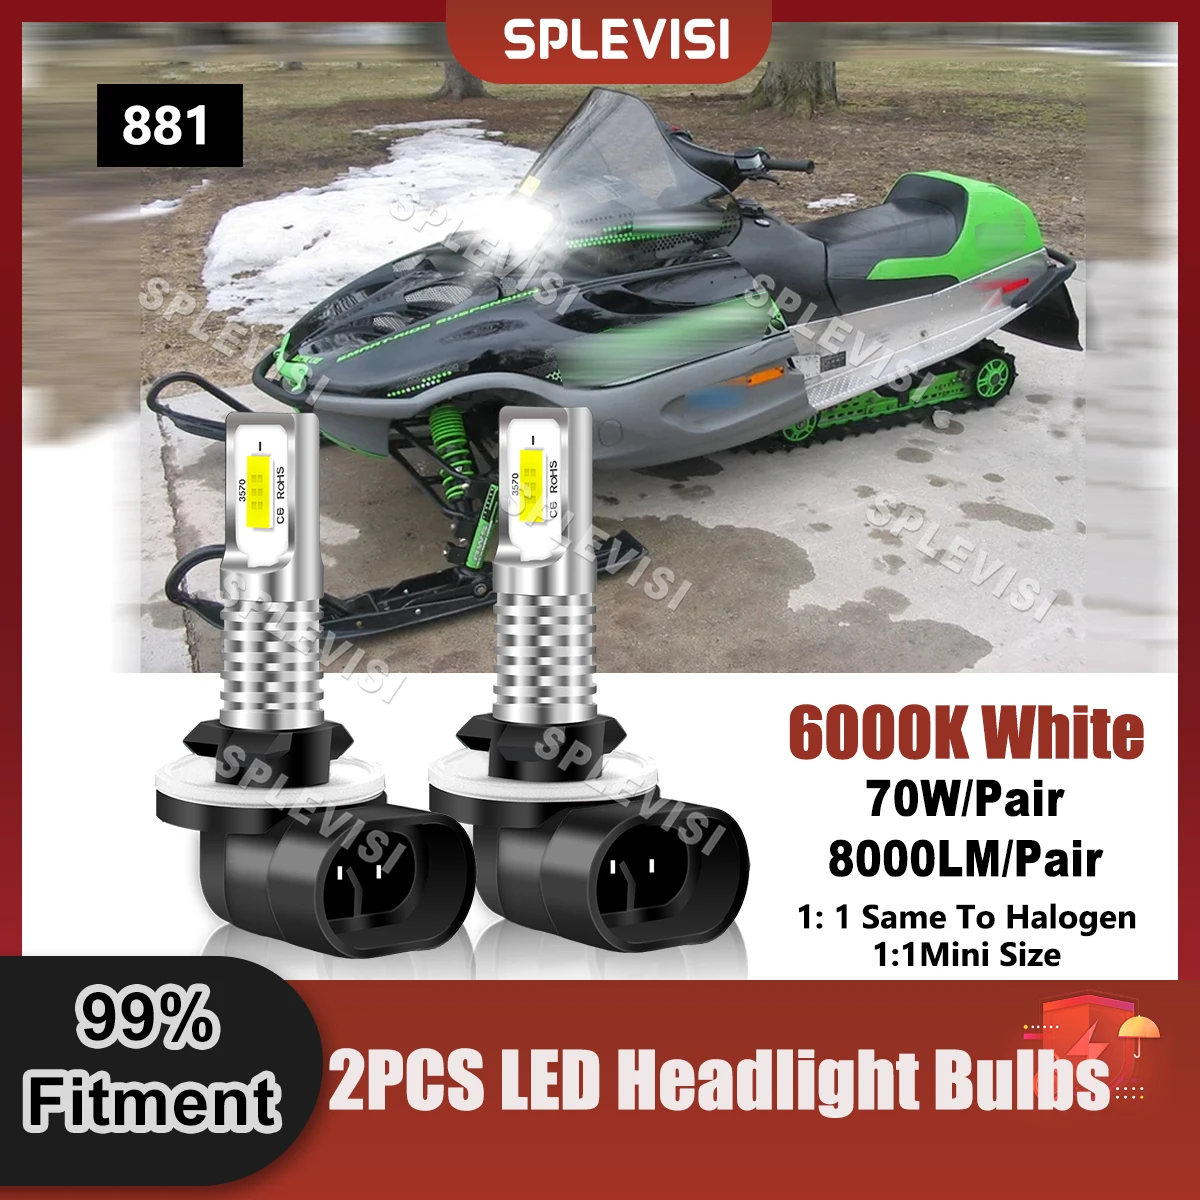 1 Pair Upgrade 881 LED Headlight Pure White For Arctic Cat ZR 500 1998 1999 2000 2001 2002 ZR 600 EFI 1998 1999 2000 2001 2002 2020 newest 2000 meter 7 led headlight for jk high low beam off road truck round laser 7 inch led headlight